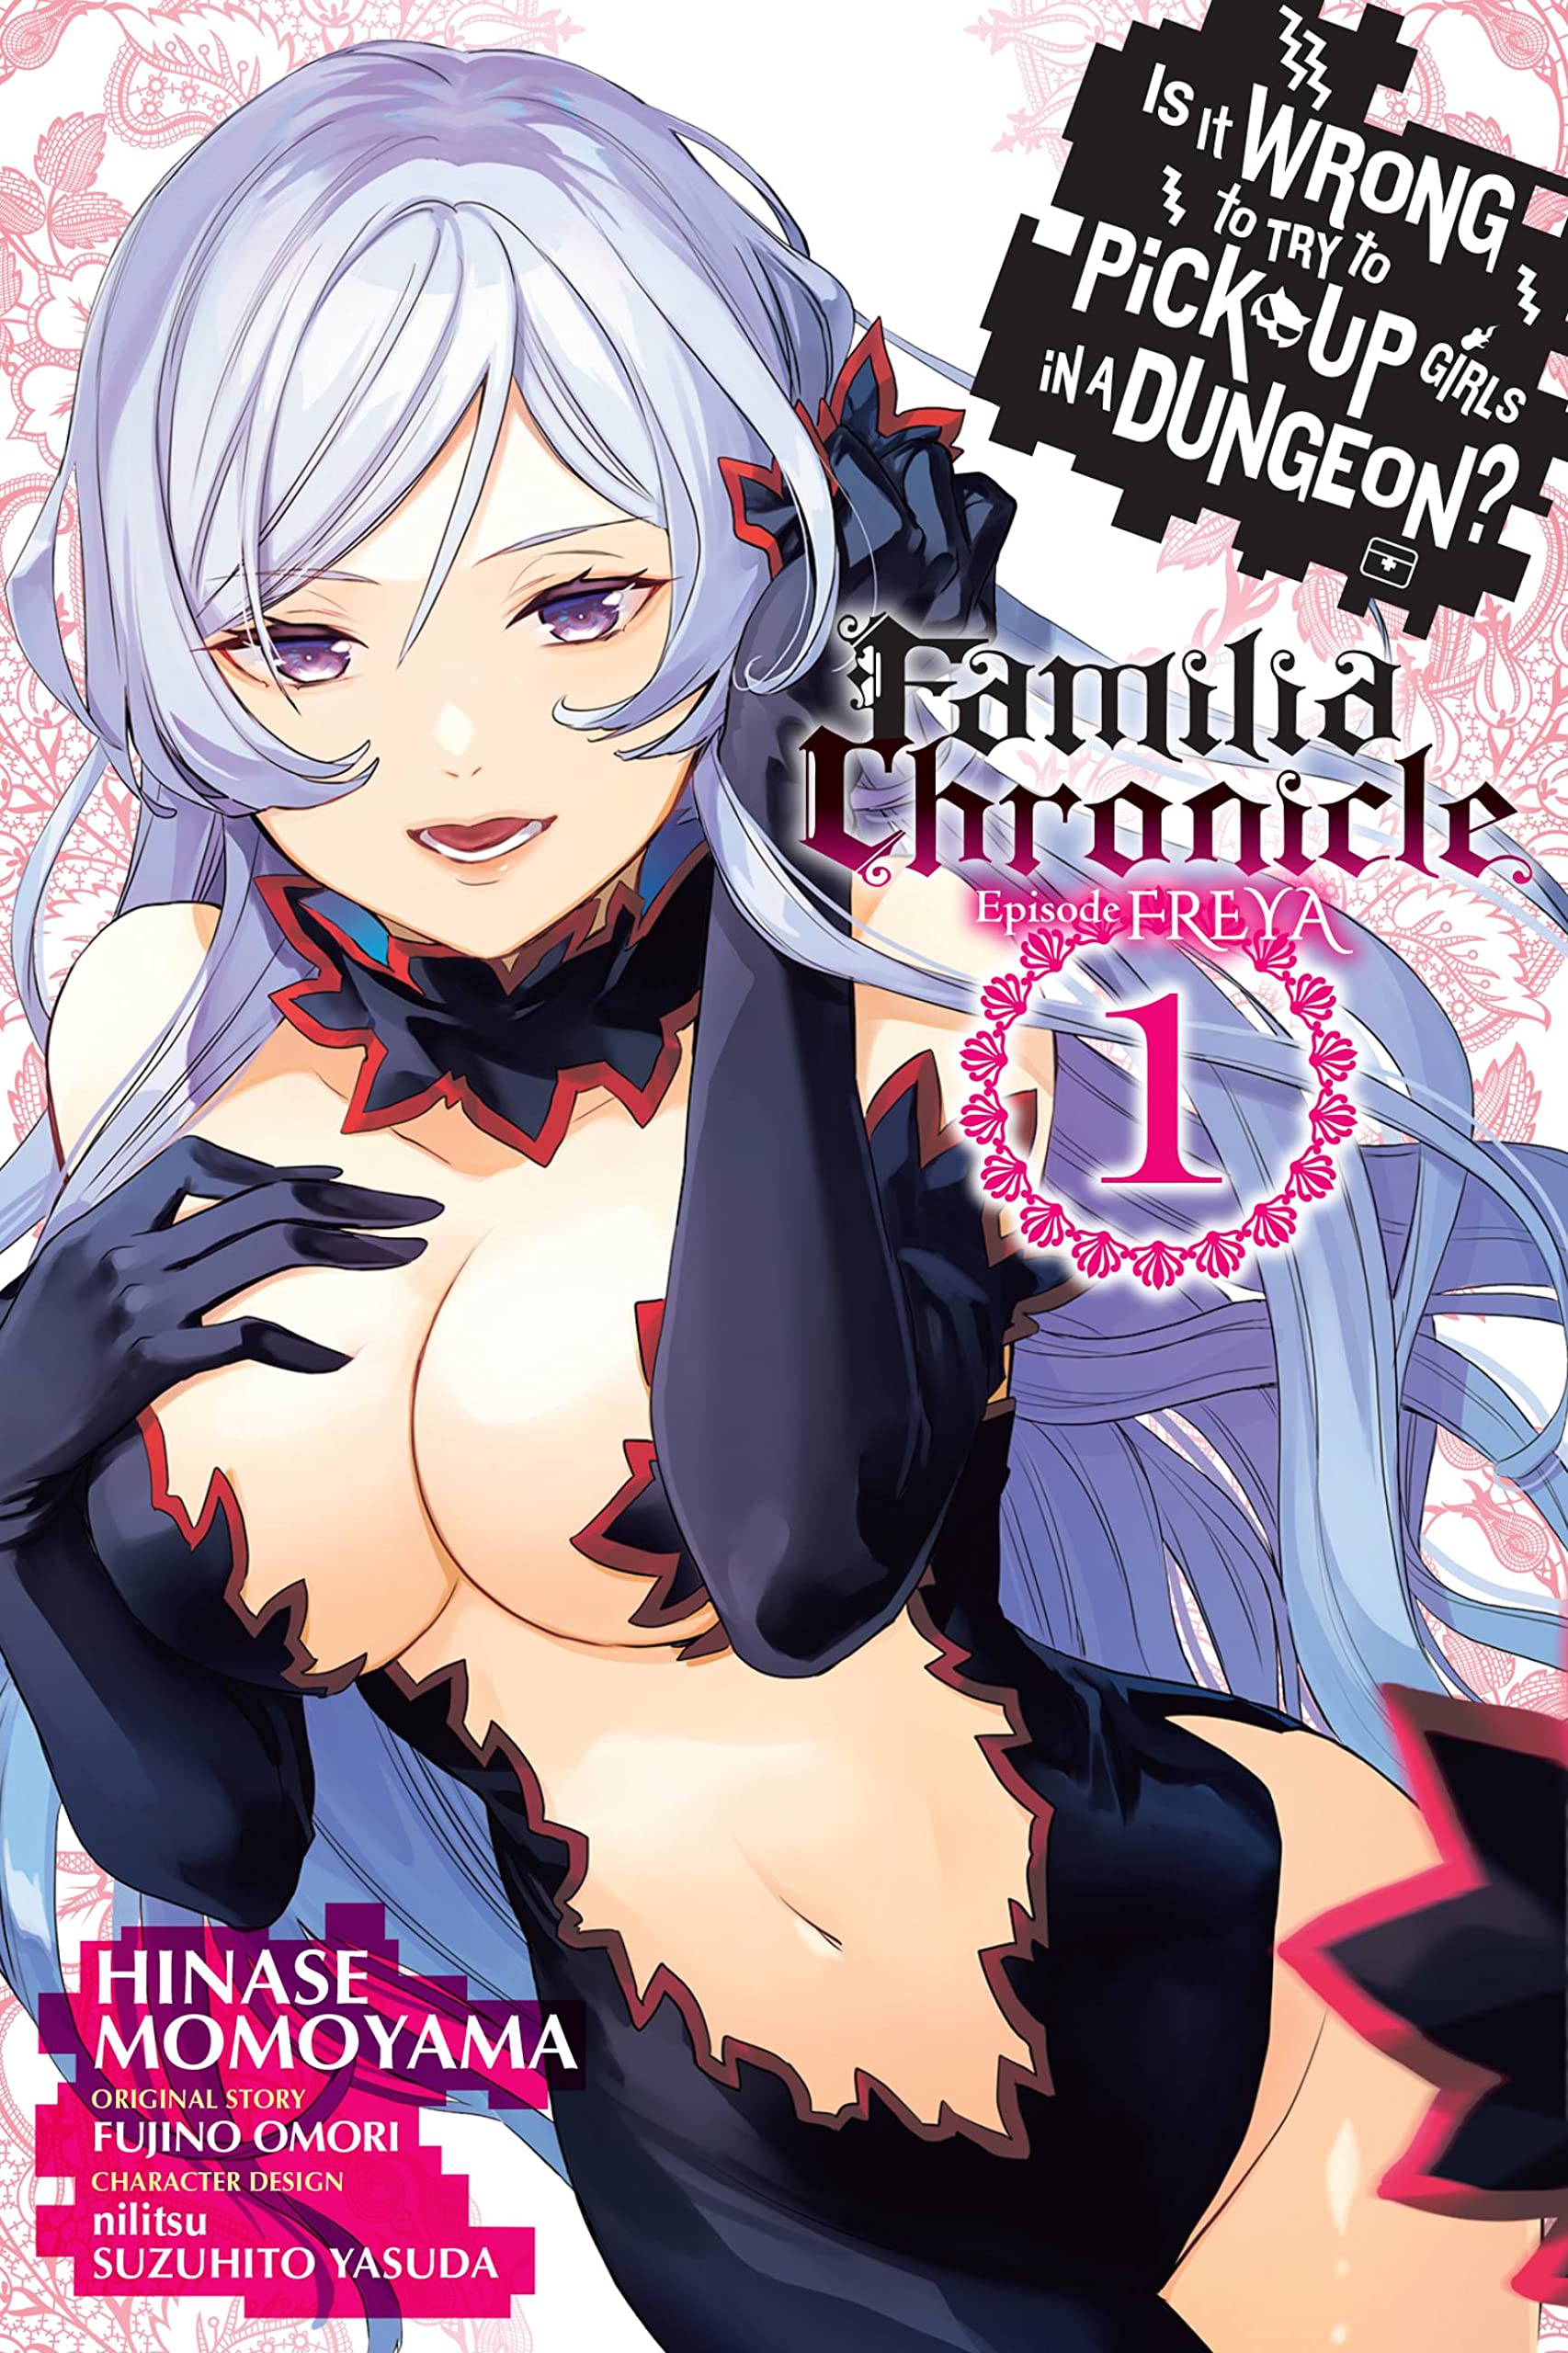 Is It Wrong to Try to Pick Up Girls in a Dungeon? Familia Chronicle Episode Freya (Manga) Vol. 01